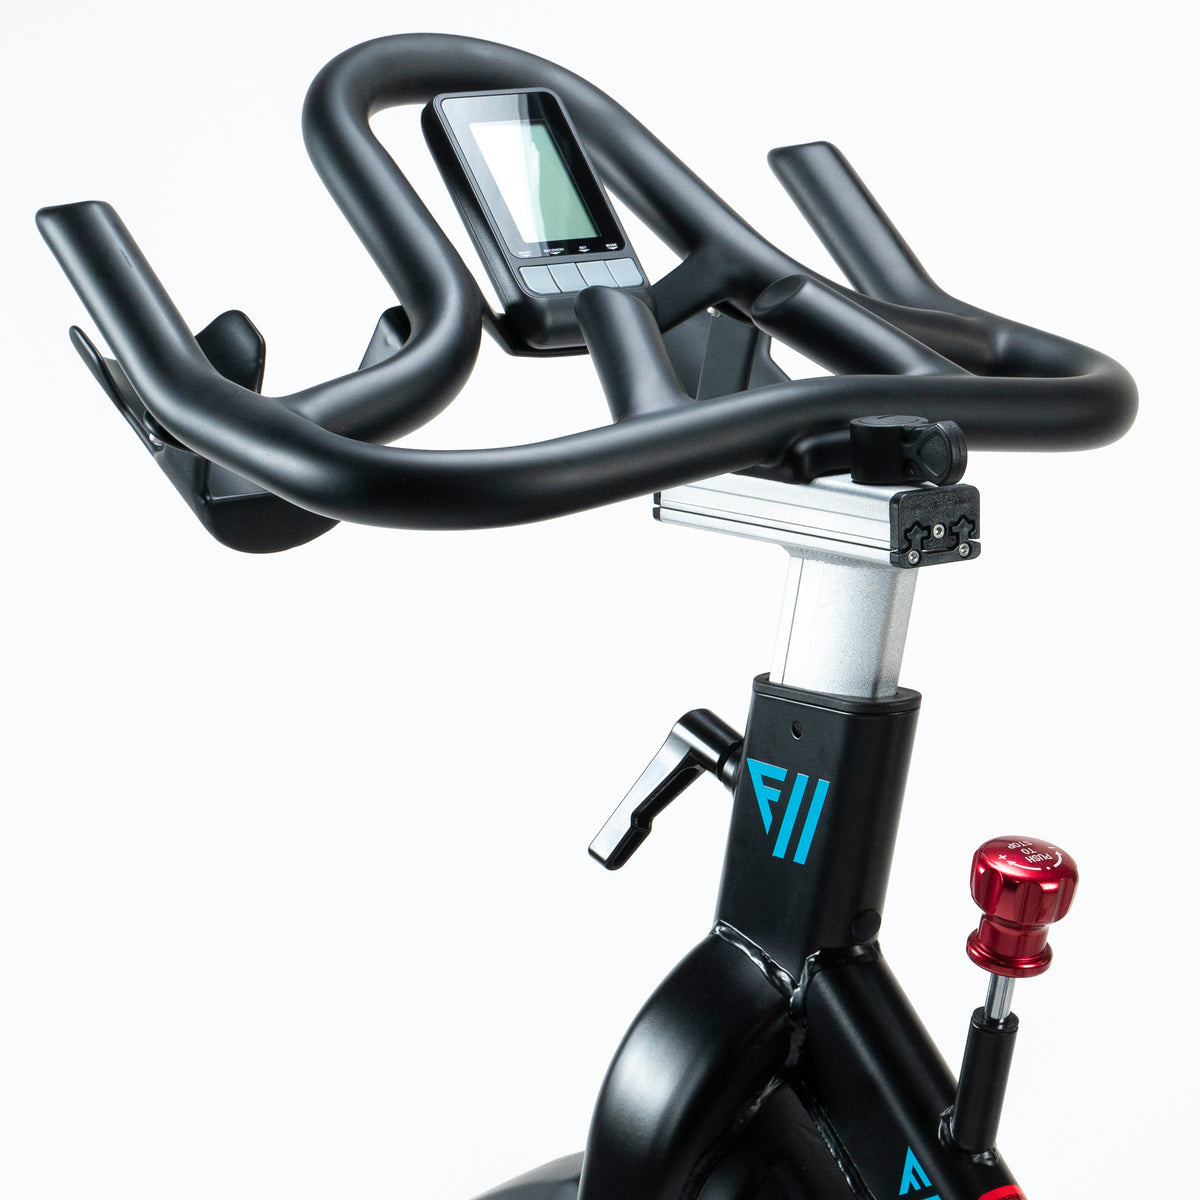 FitWay Equip. 1500IC Indoor Cycle - Console Close Up